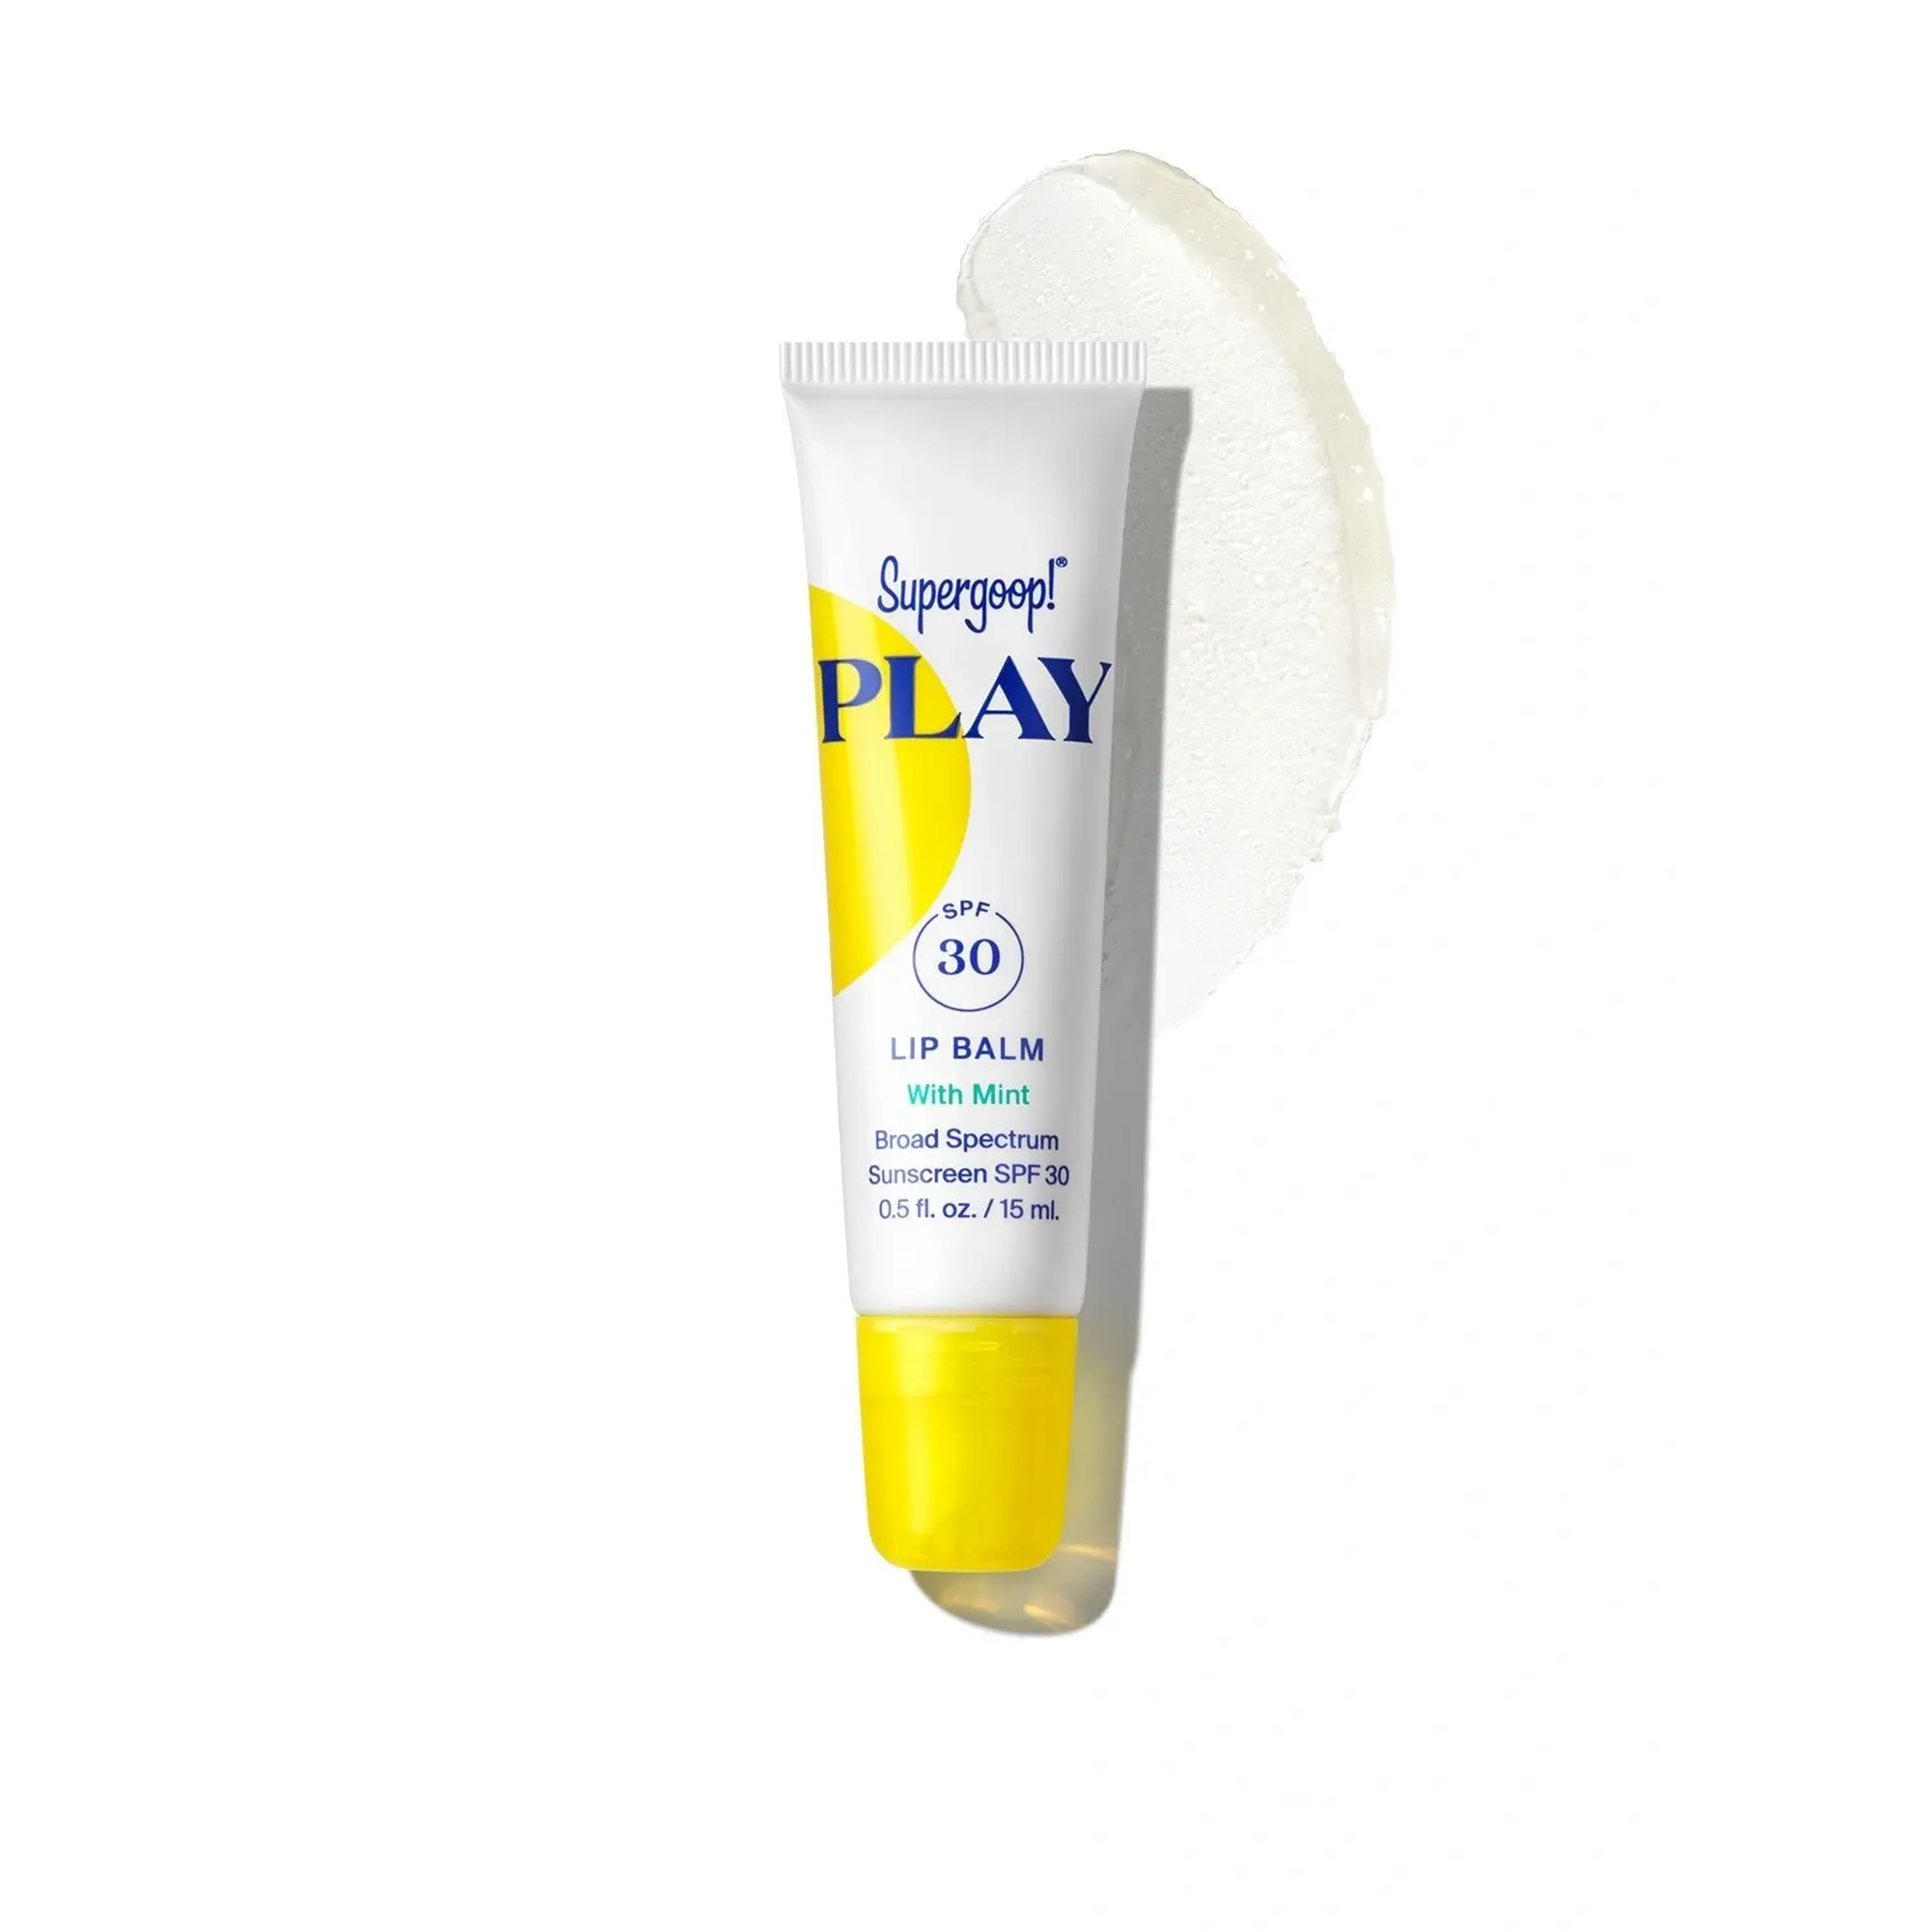 Supergoop! PLAY Lip Balm SPF 30 with Mint